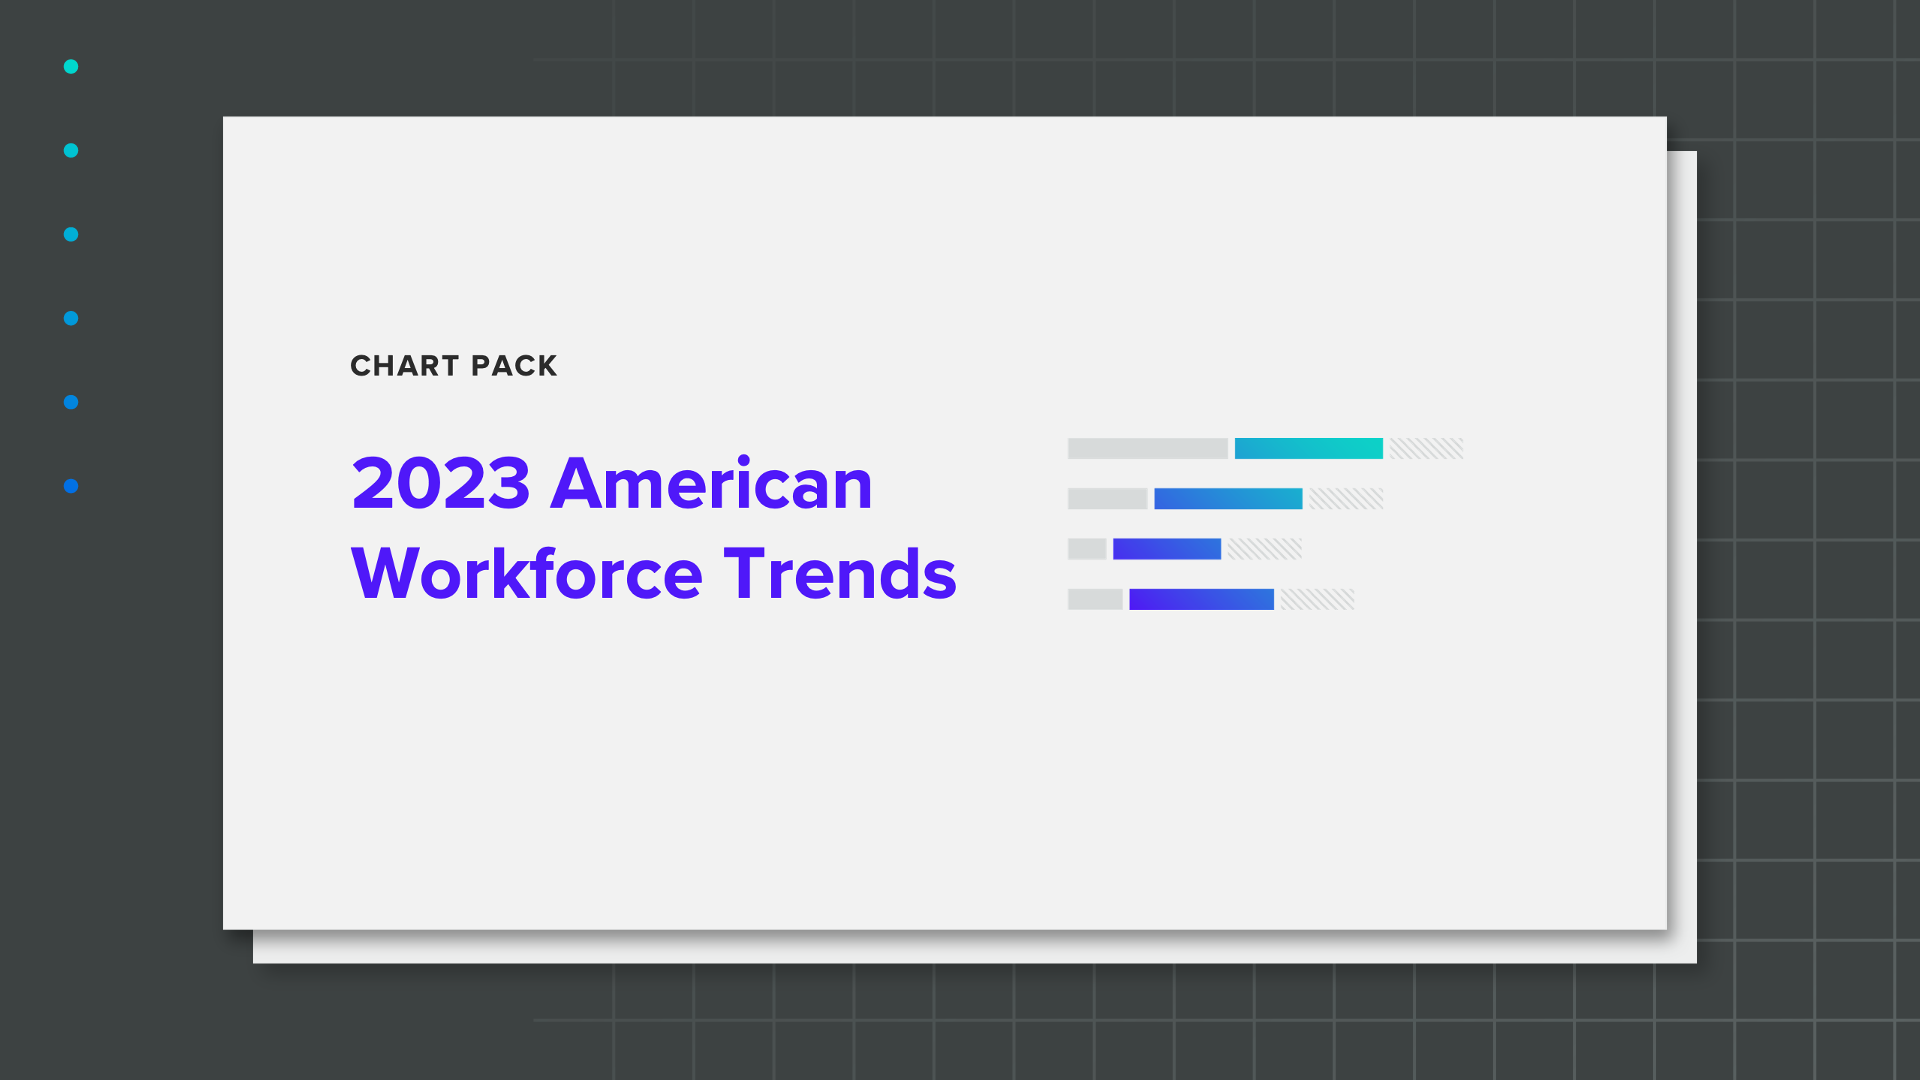 Download the 2023 American Workforce Trends Chart Pack